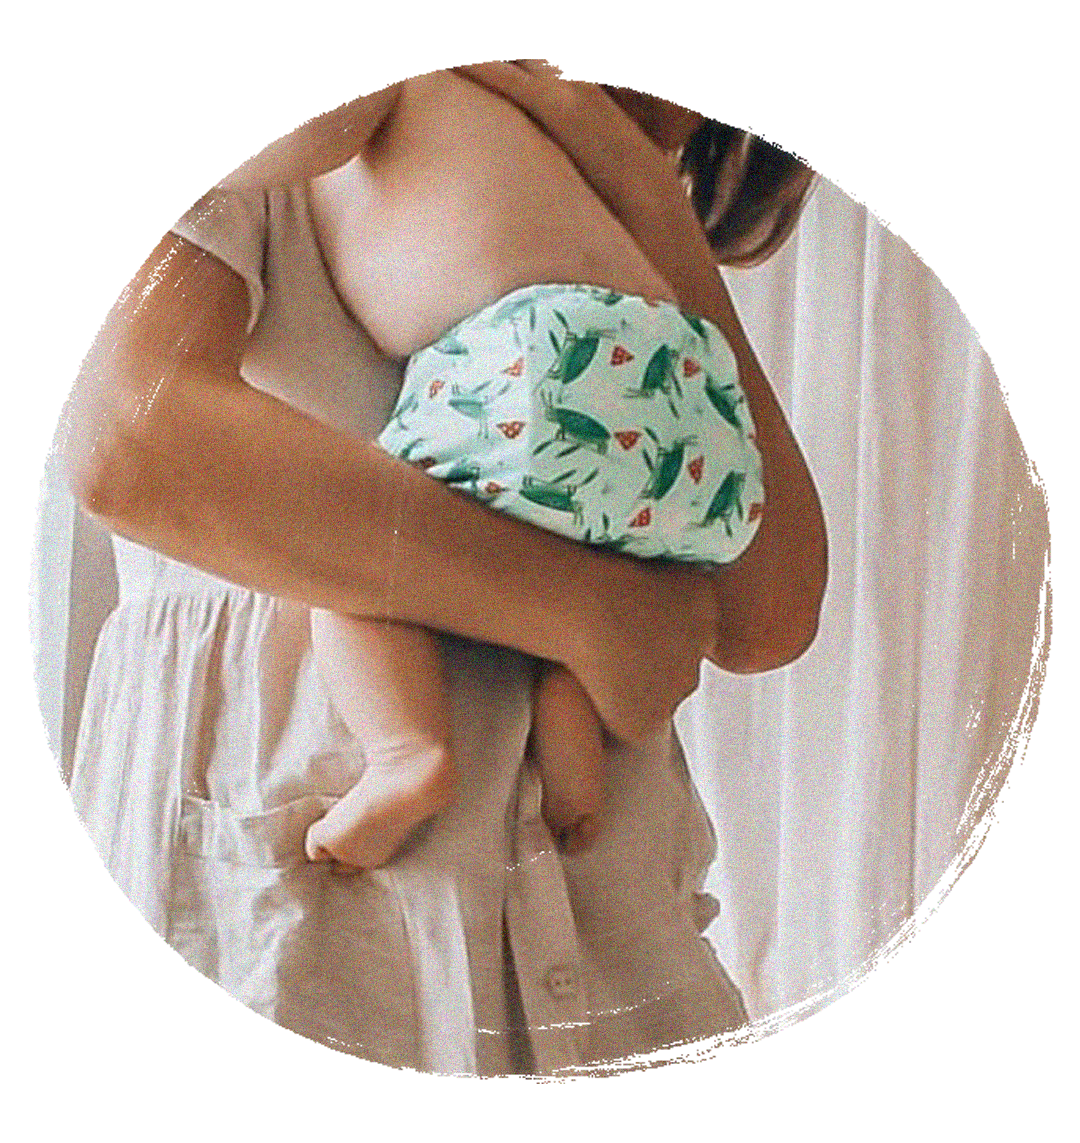 Reusable nappies, the next step in your household's zero waste